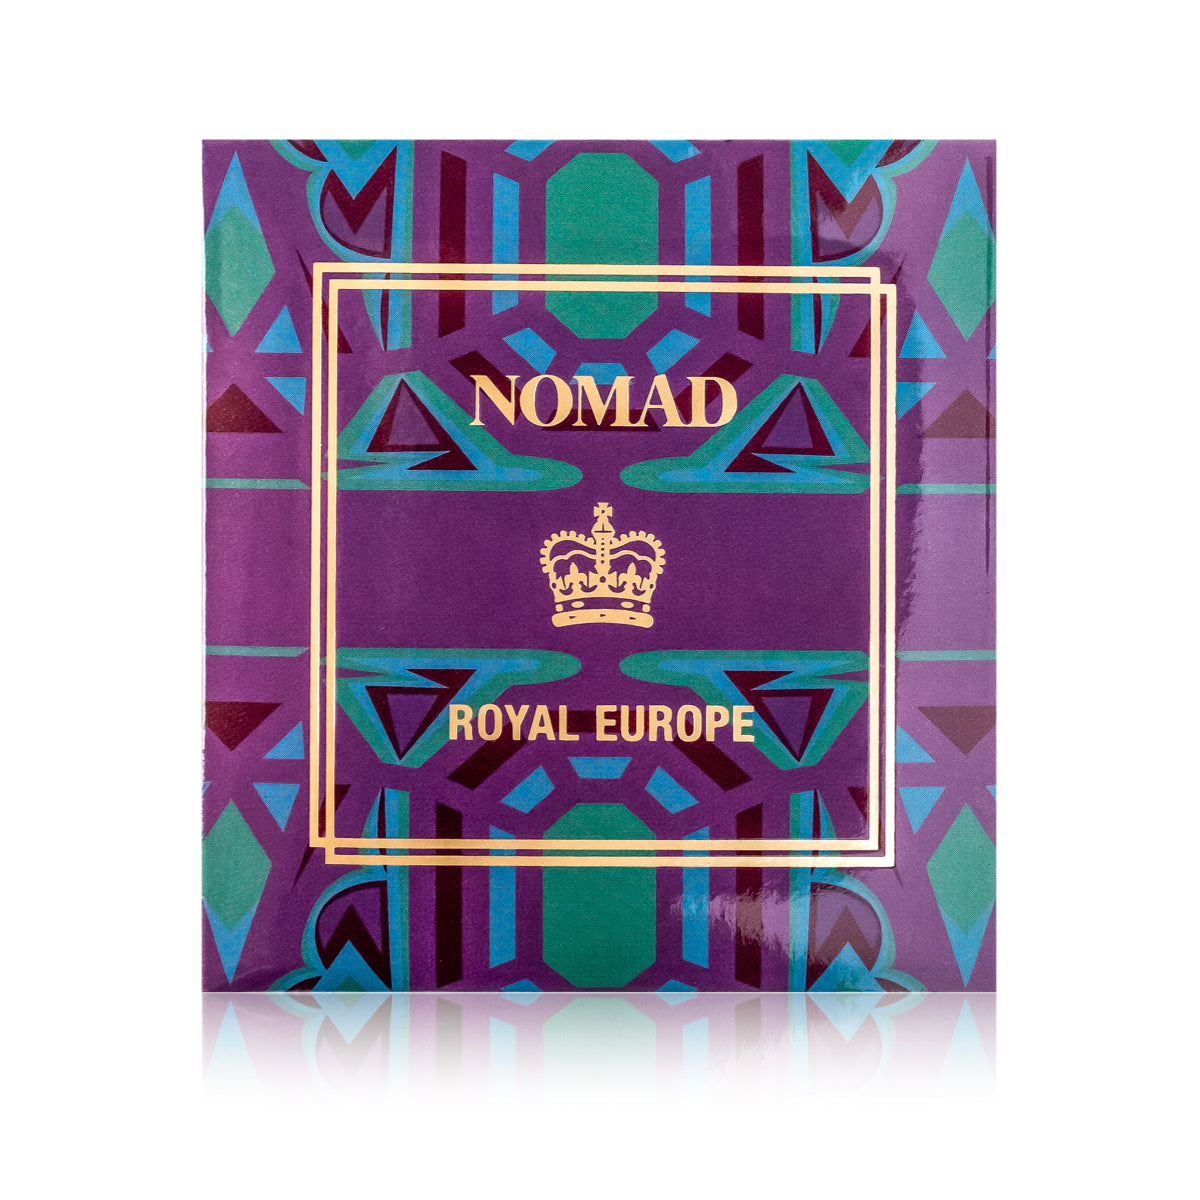 NOMAD x Royal Europe Intense Multi-Chrome Pigment in Royal Orb